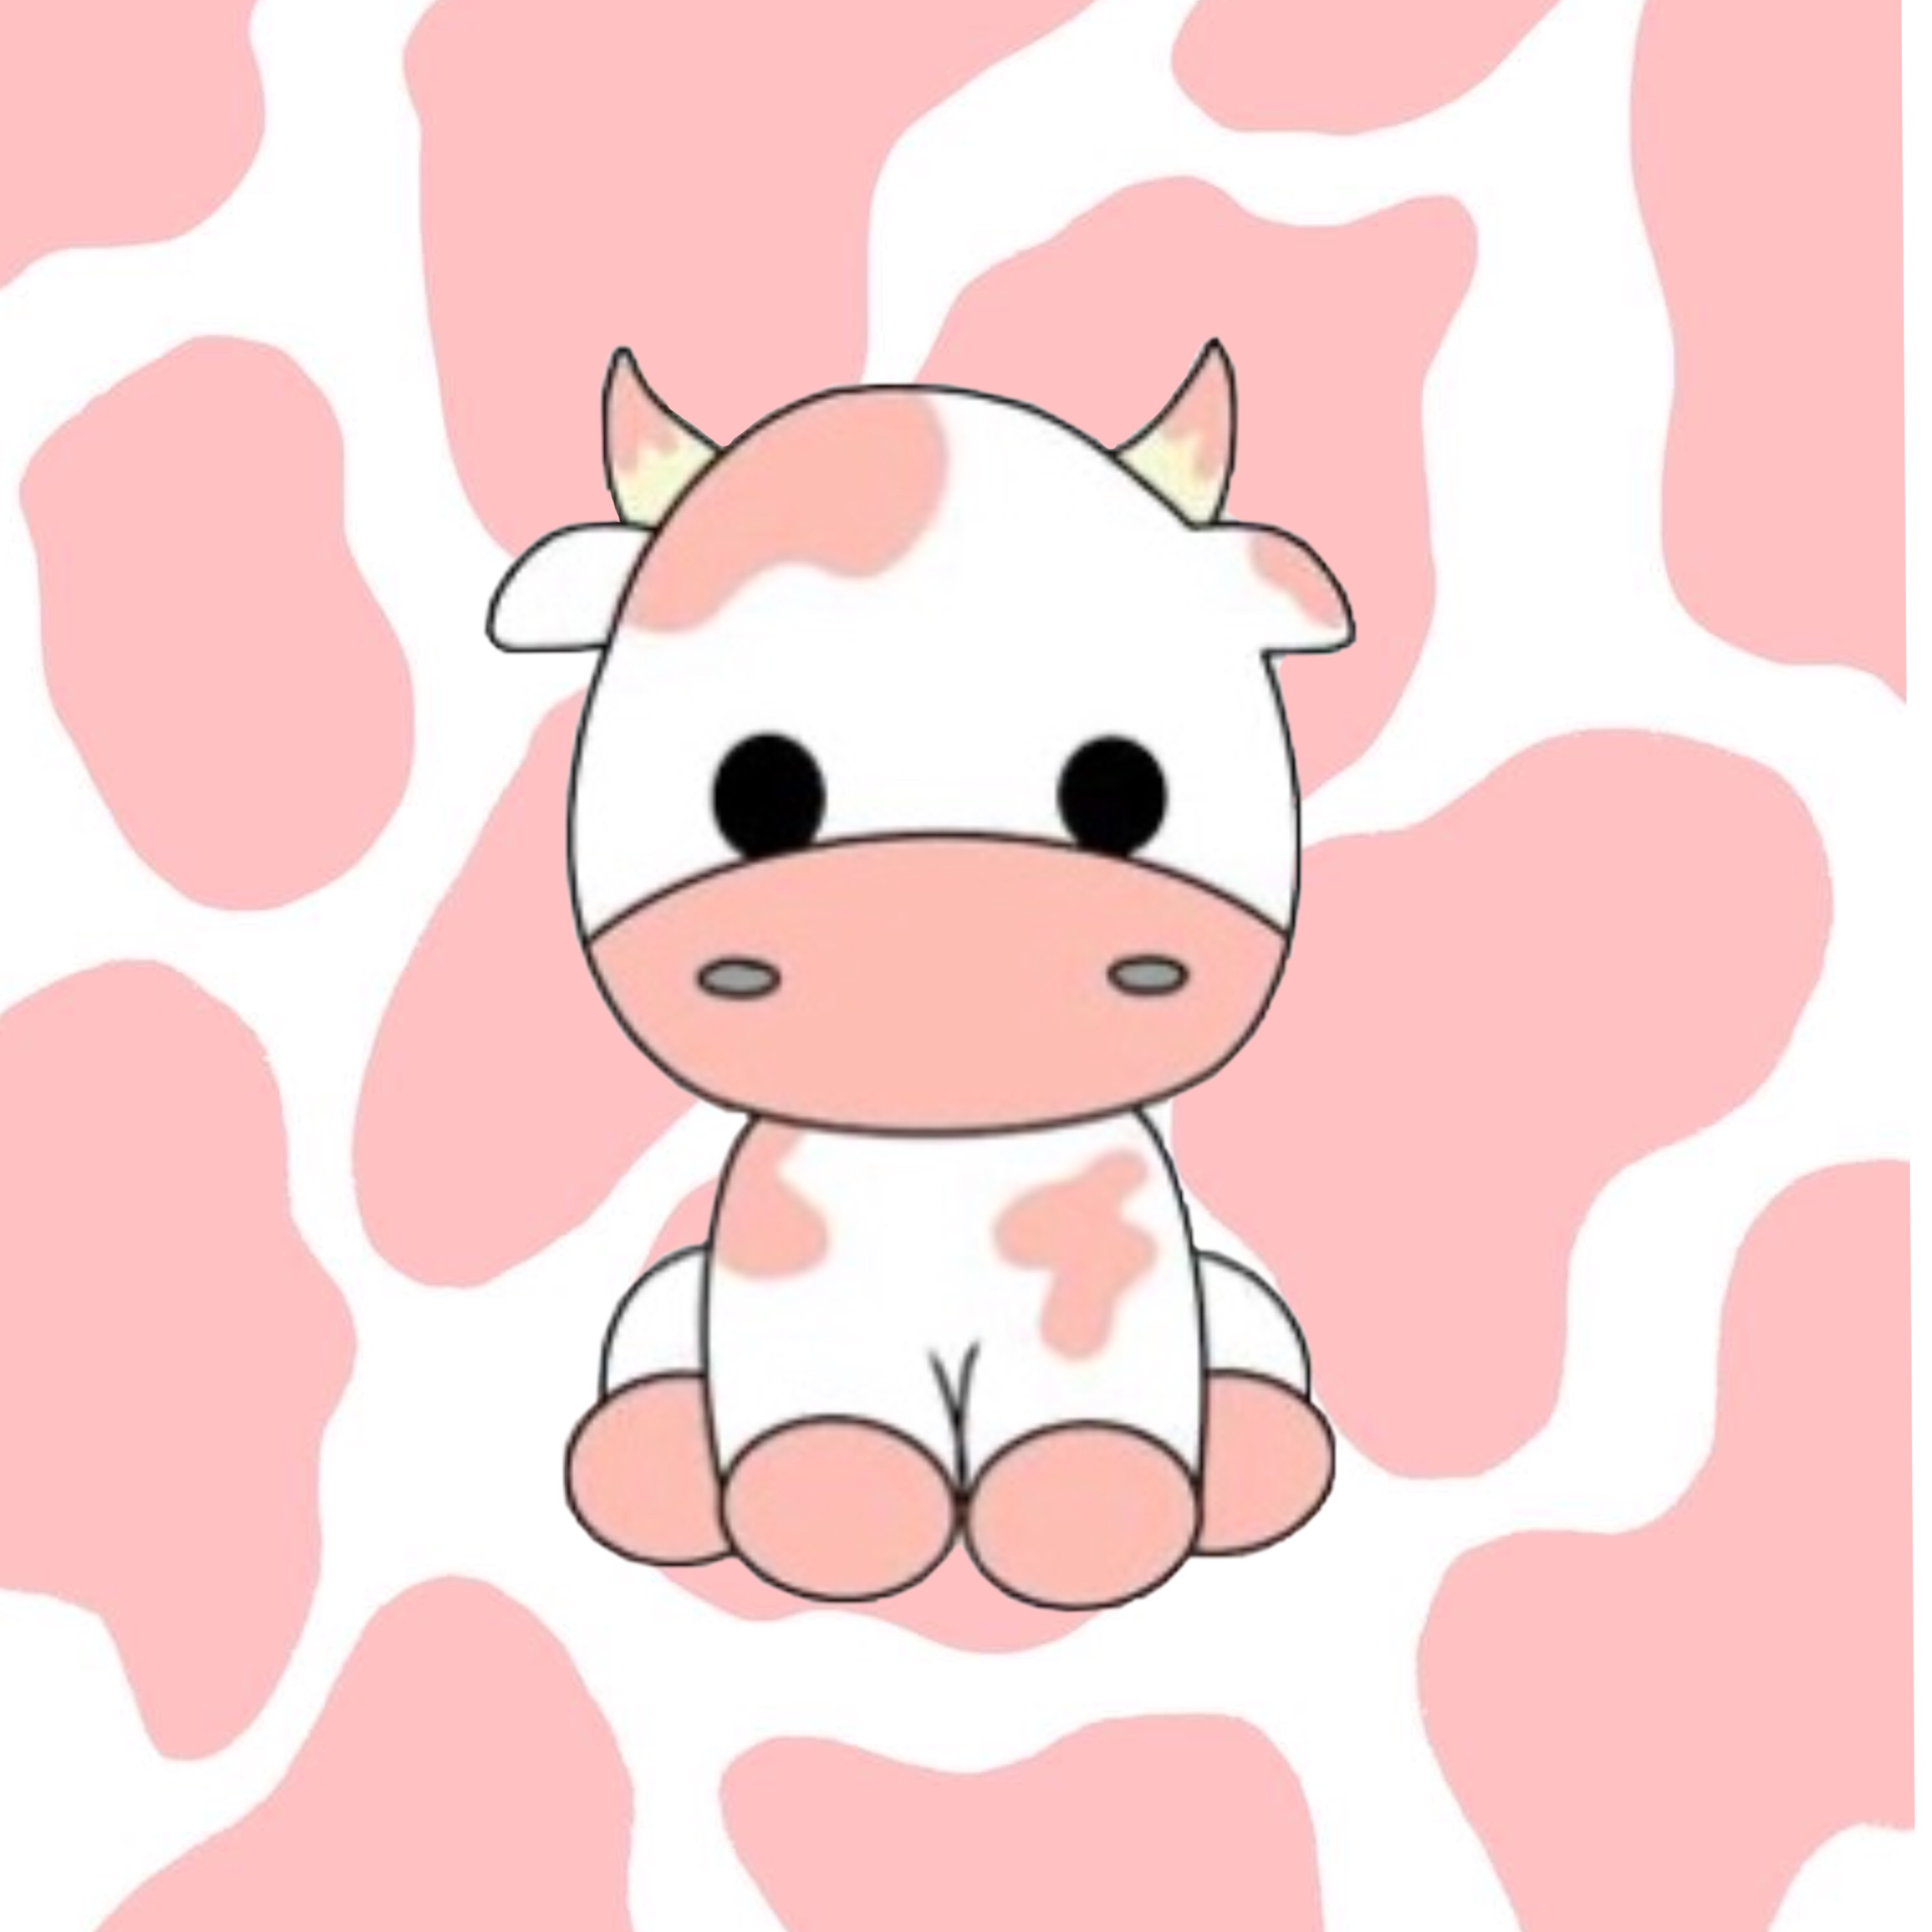 This visual is about pink cow freetoedit #pink #cow.